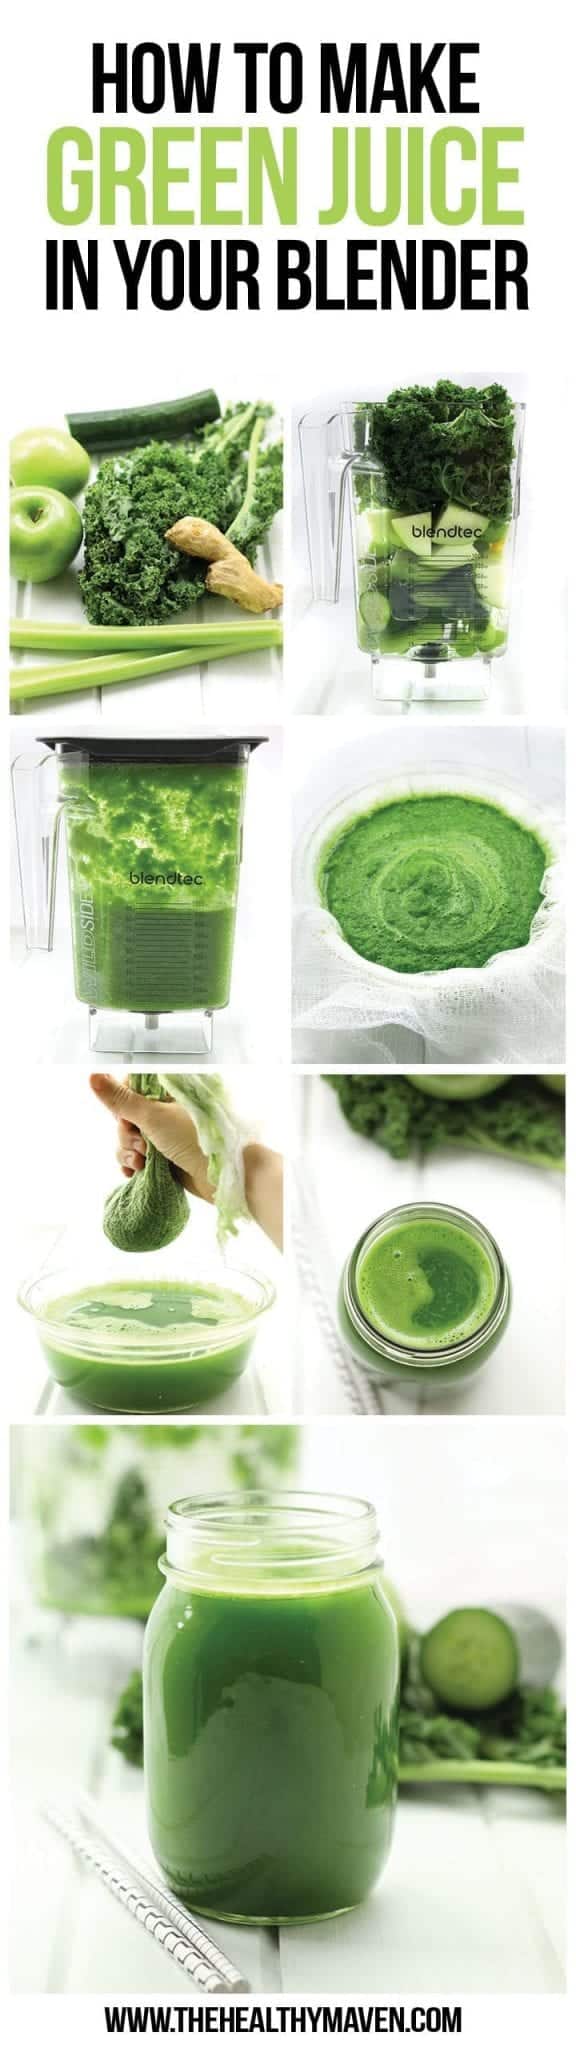  Don't have a juicer? No problem! Here's a step-by -step tutorial on how to make green juice in your blender!